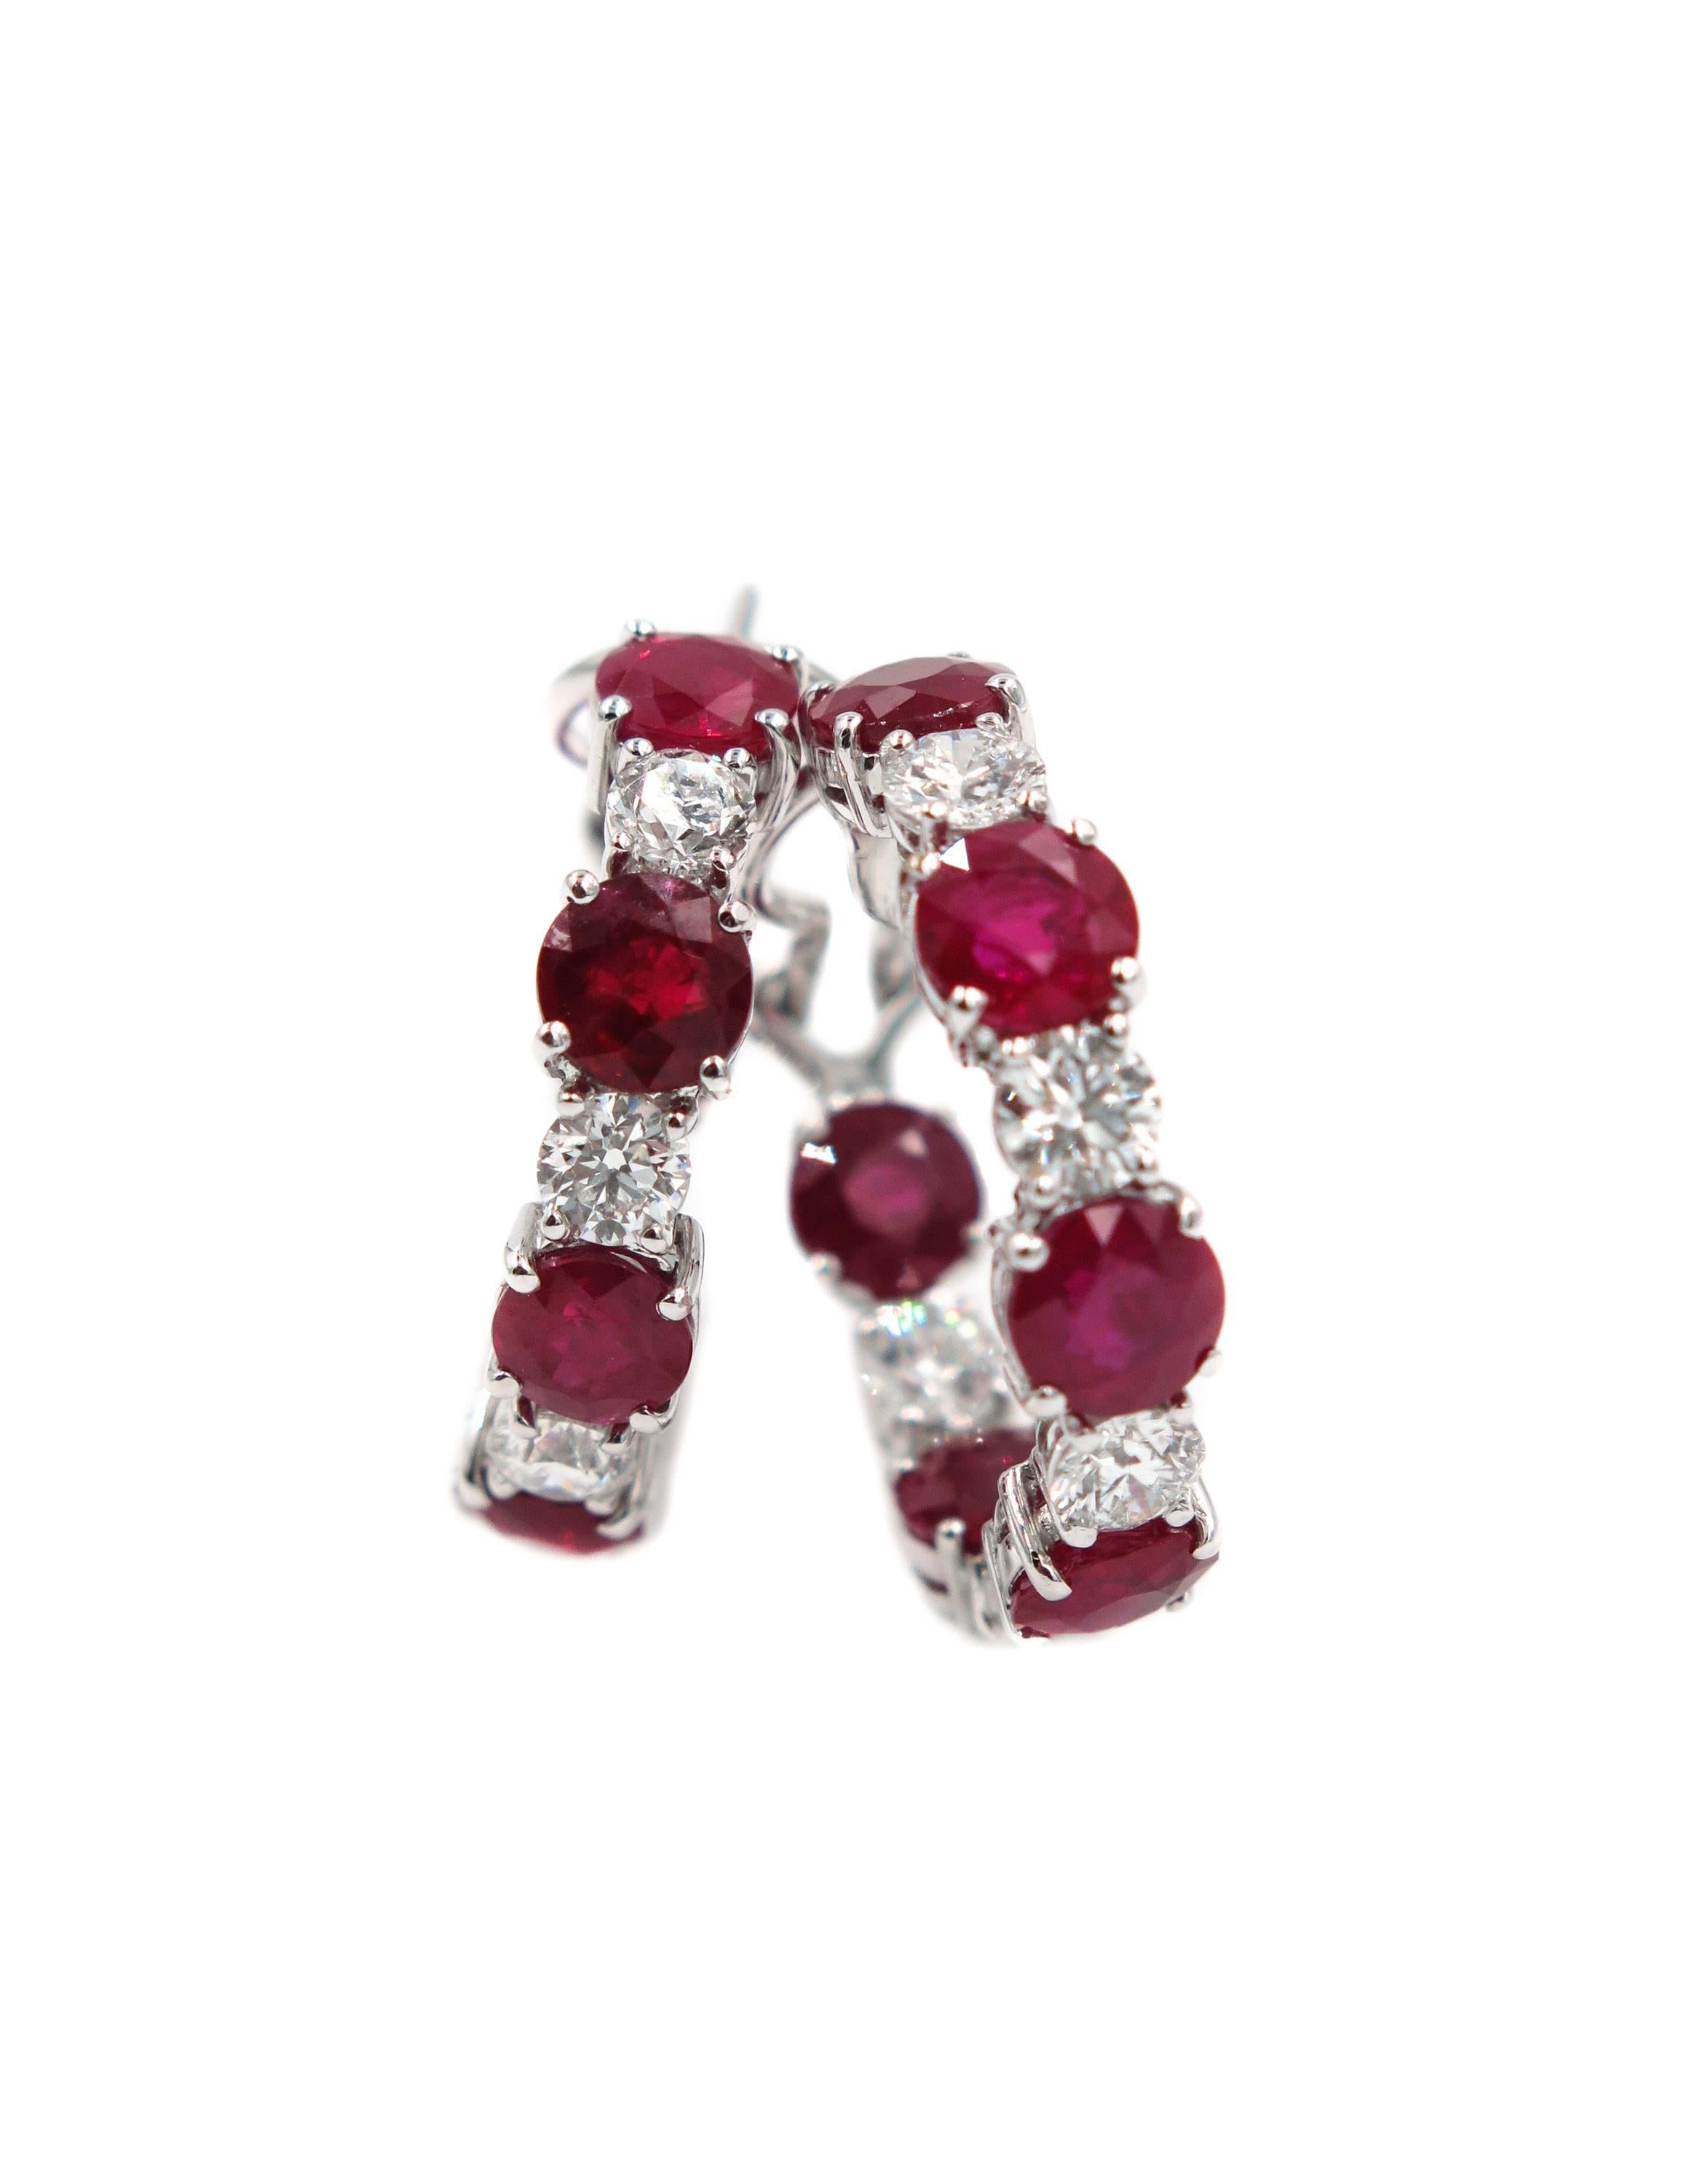 Classic and refined, a game of contrast between rubies and diamonds with a feminine design.  
Expertly handcrafted in 18k white gold with 10 round white diamonds weighing 3.03 carats and 12 rubies with a total weigh of 12.49 carats.
Wear them for a